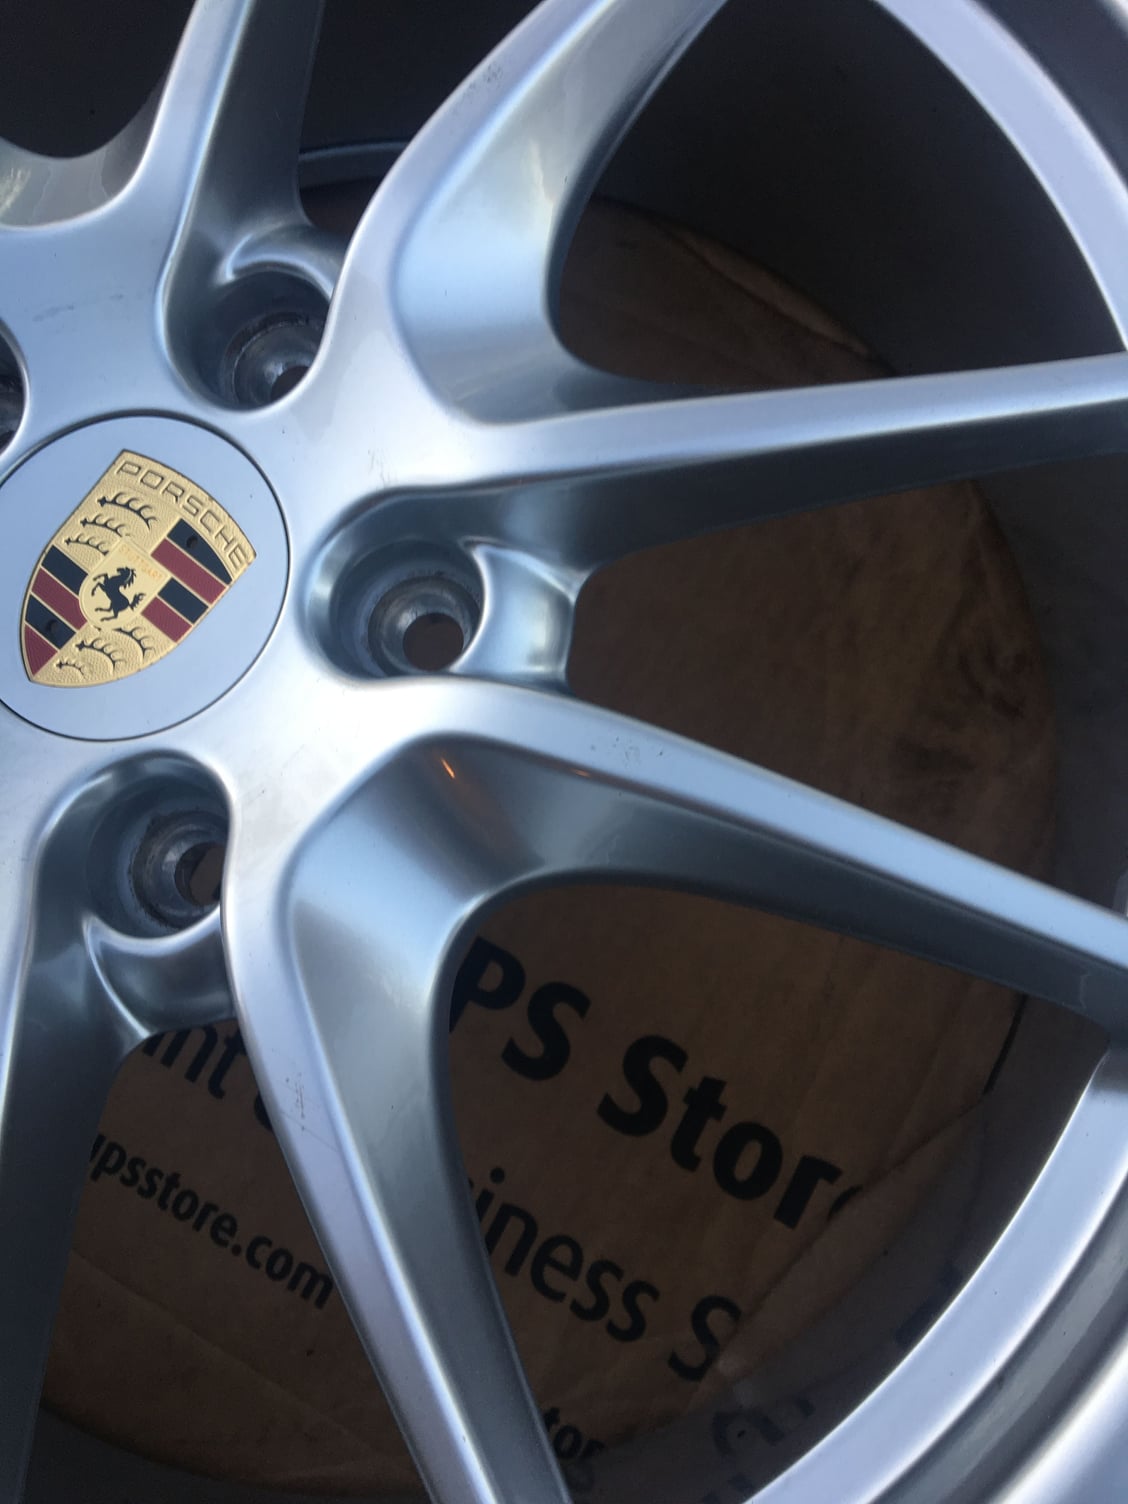 Wheels and Tires/Axles - 20" OEM Porsche Cayman/Boxster Carrera S III Wheels - 981 987 986 718 - Used - 1996 to 2018 Porsche Boxster - 2005 to 2018 Porsche Cayman - Minneapolis, MN 55447, United States